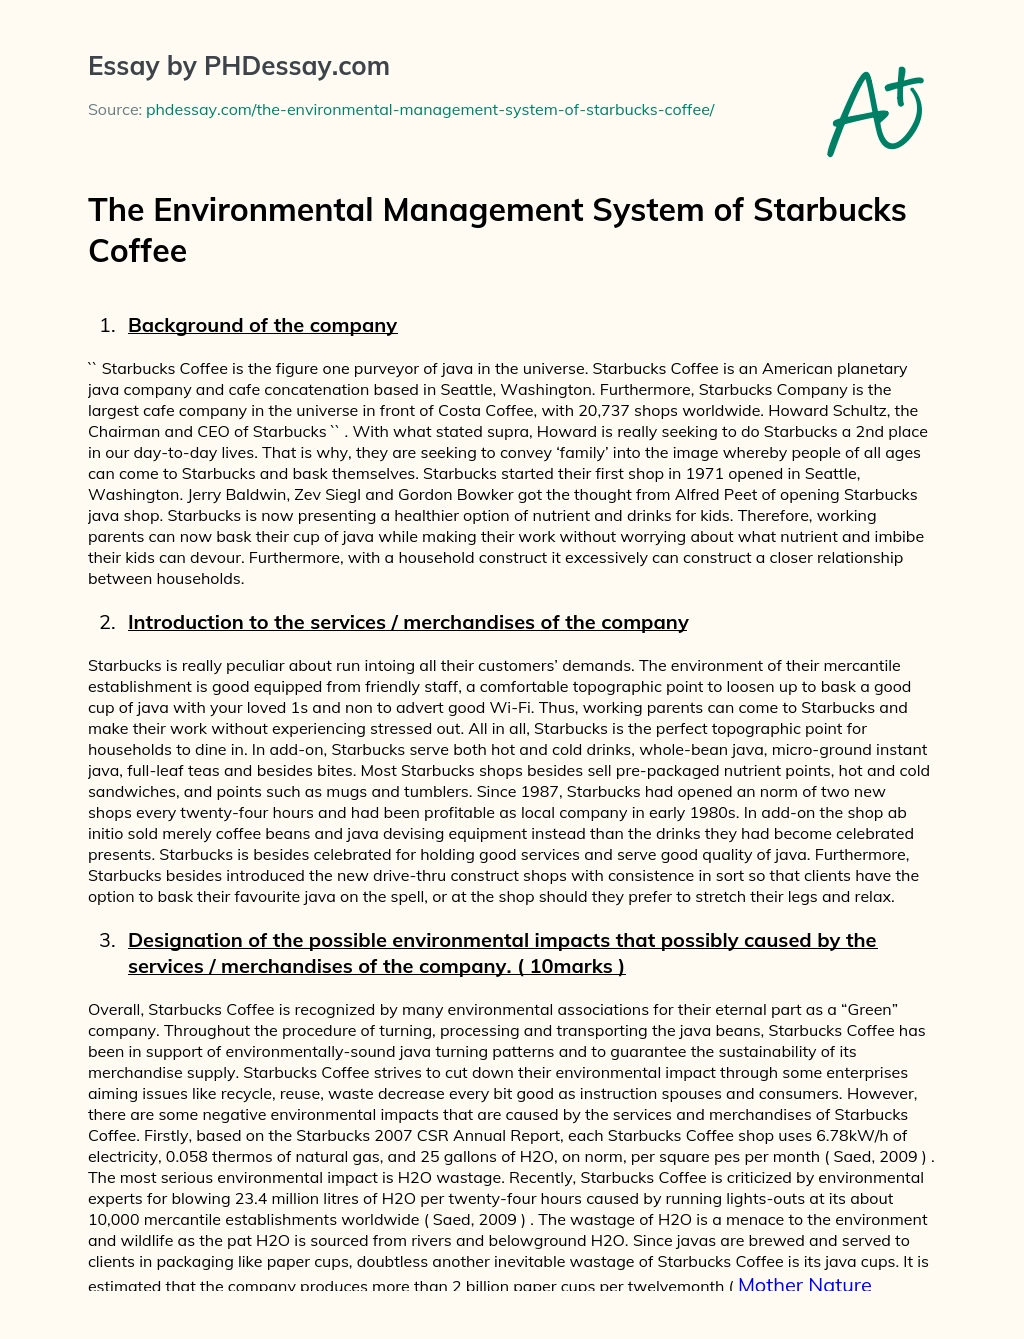 The Environmental Management System of Starbucks Coffee essay